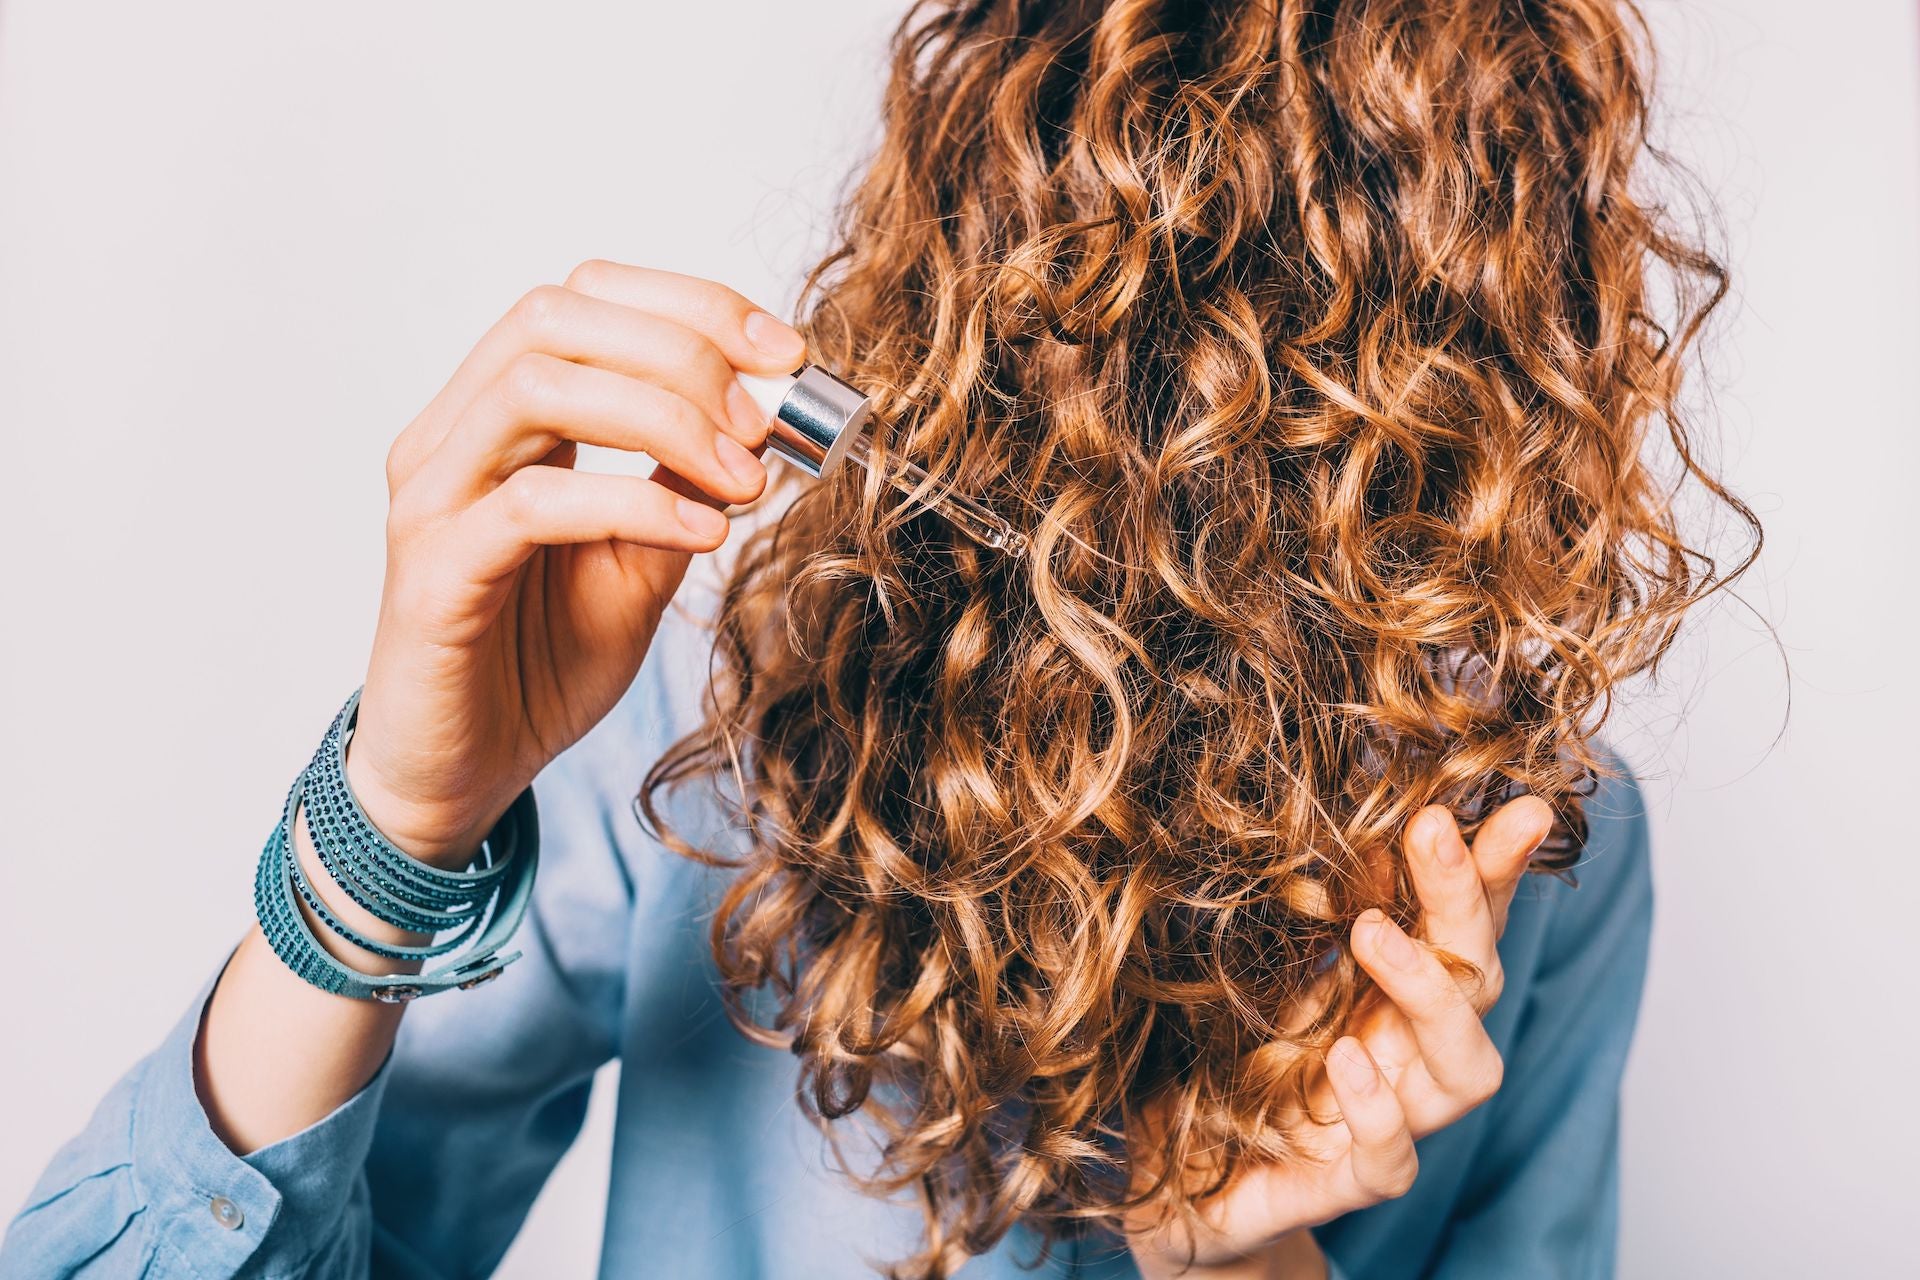 Can Essential Oils Help with Hair Growth?